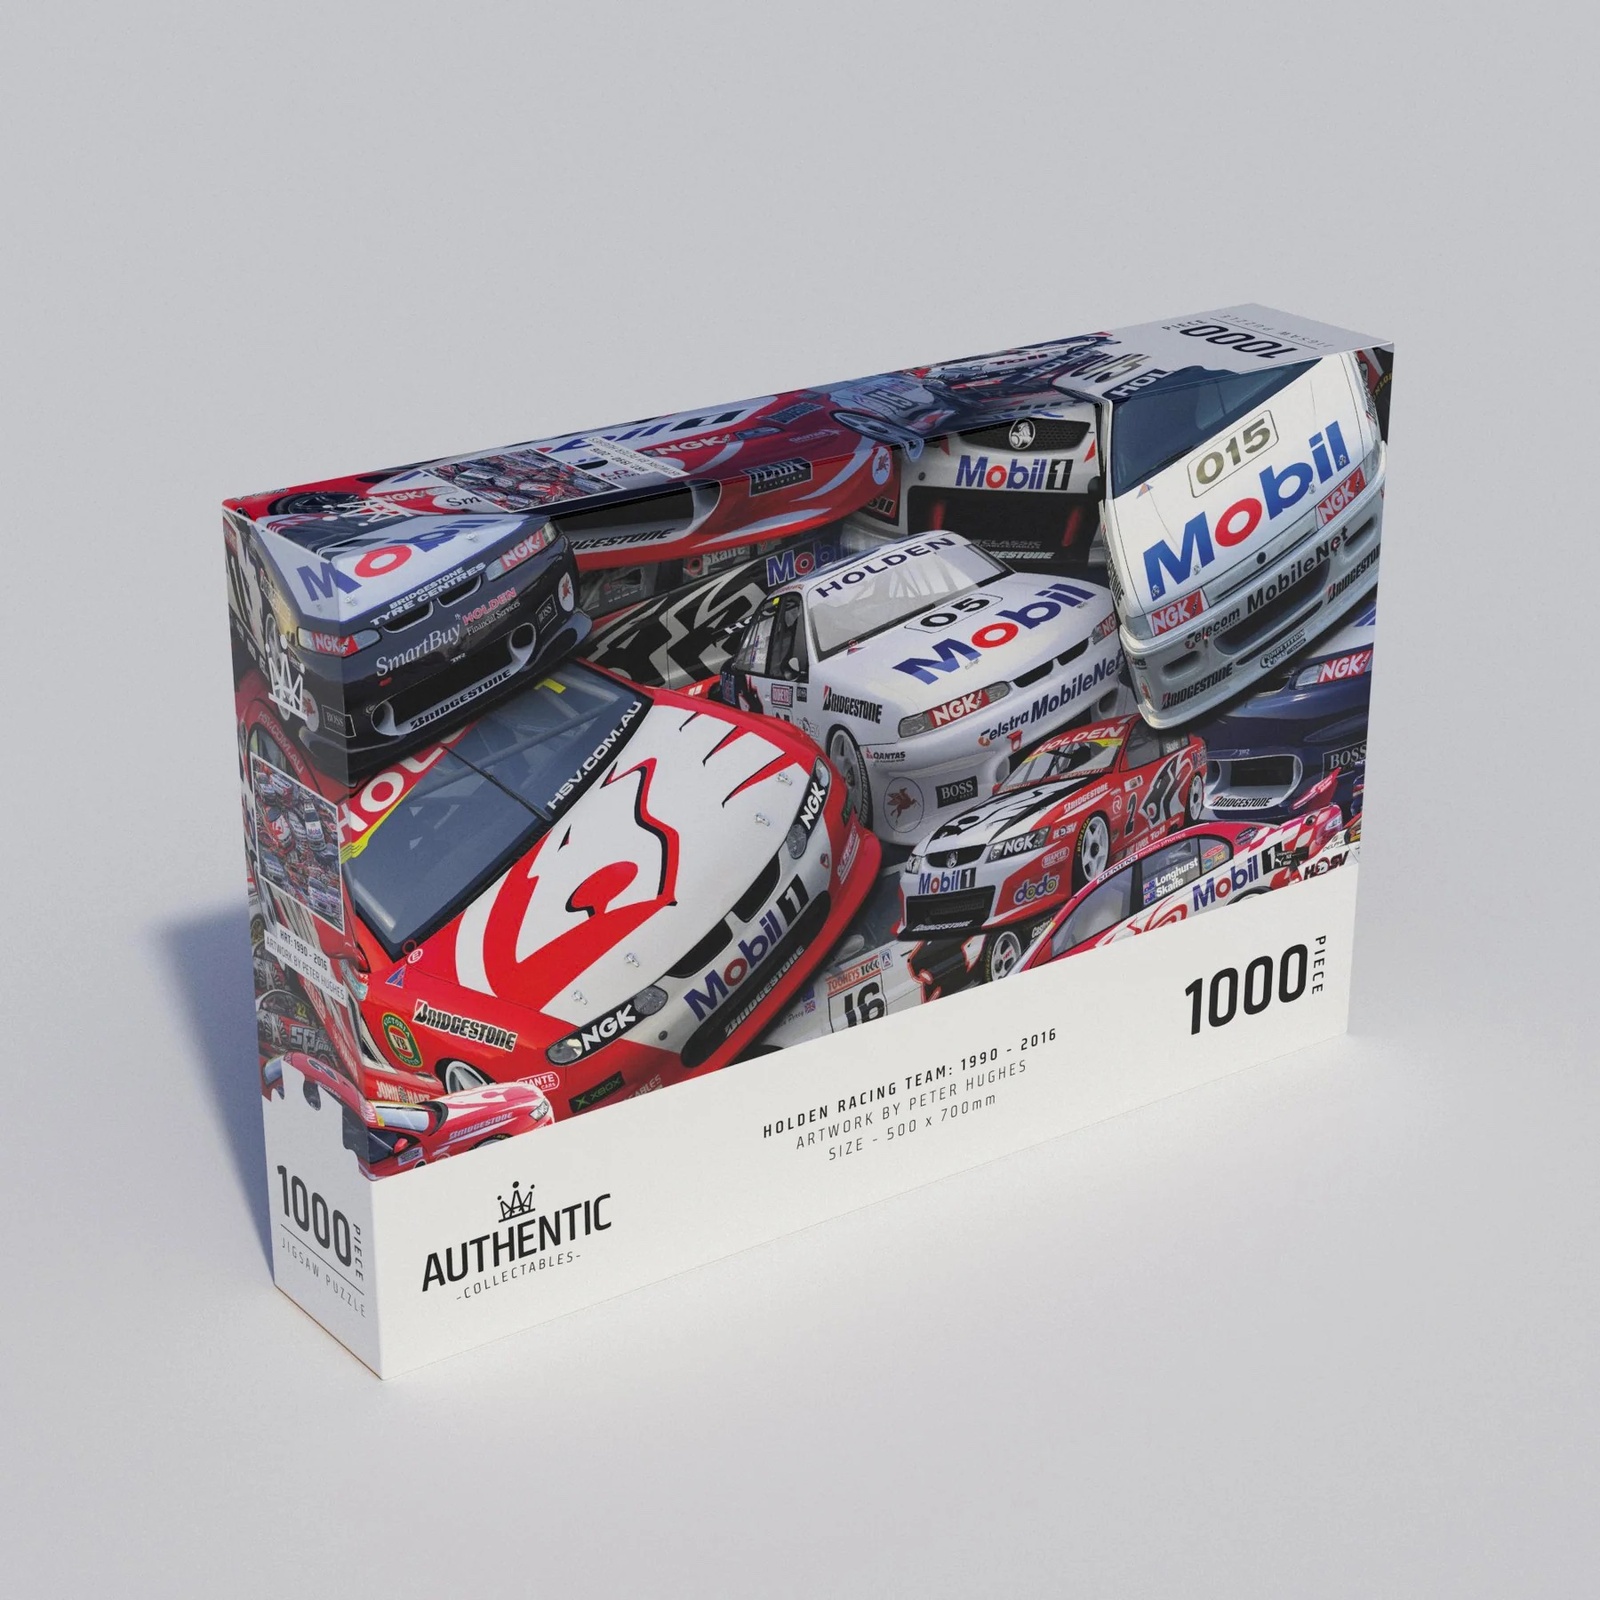 Authentic Collectables,Holden Racing Team 1990-2016 1000 Piece Jigsaw Puzzle by Authentic Collectables